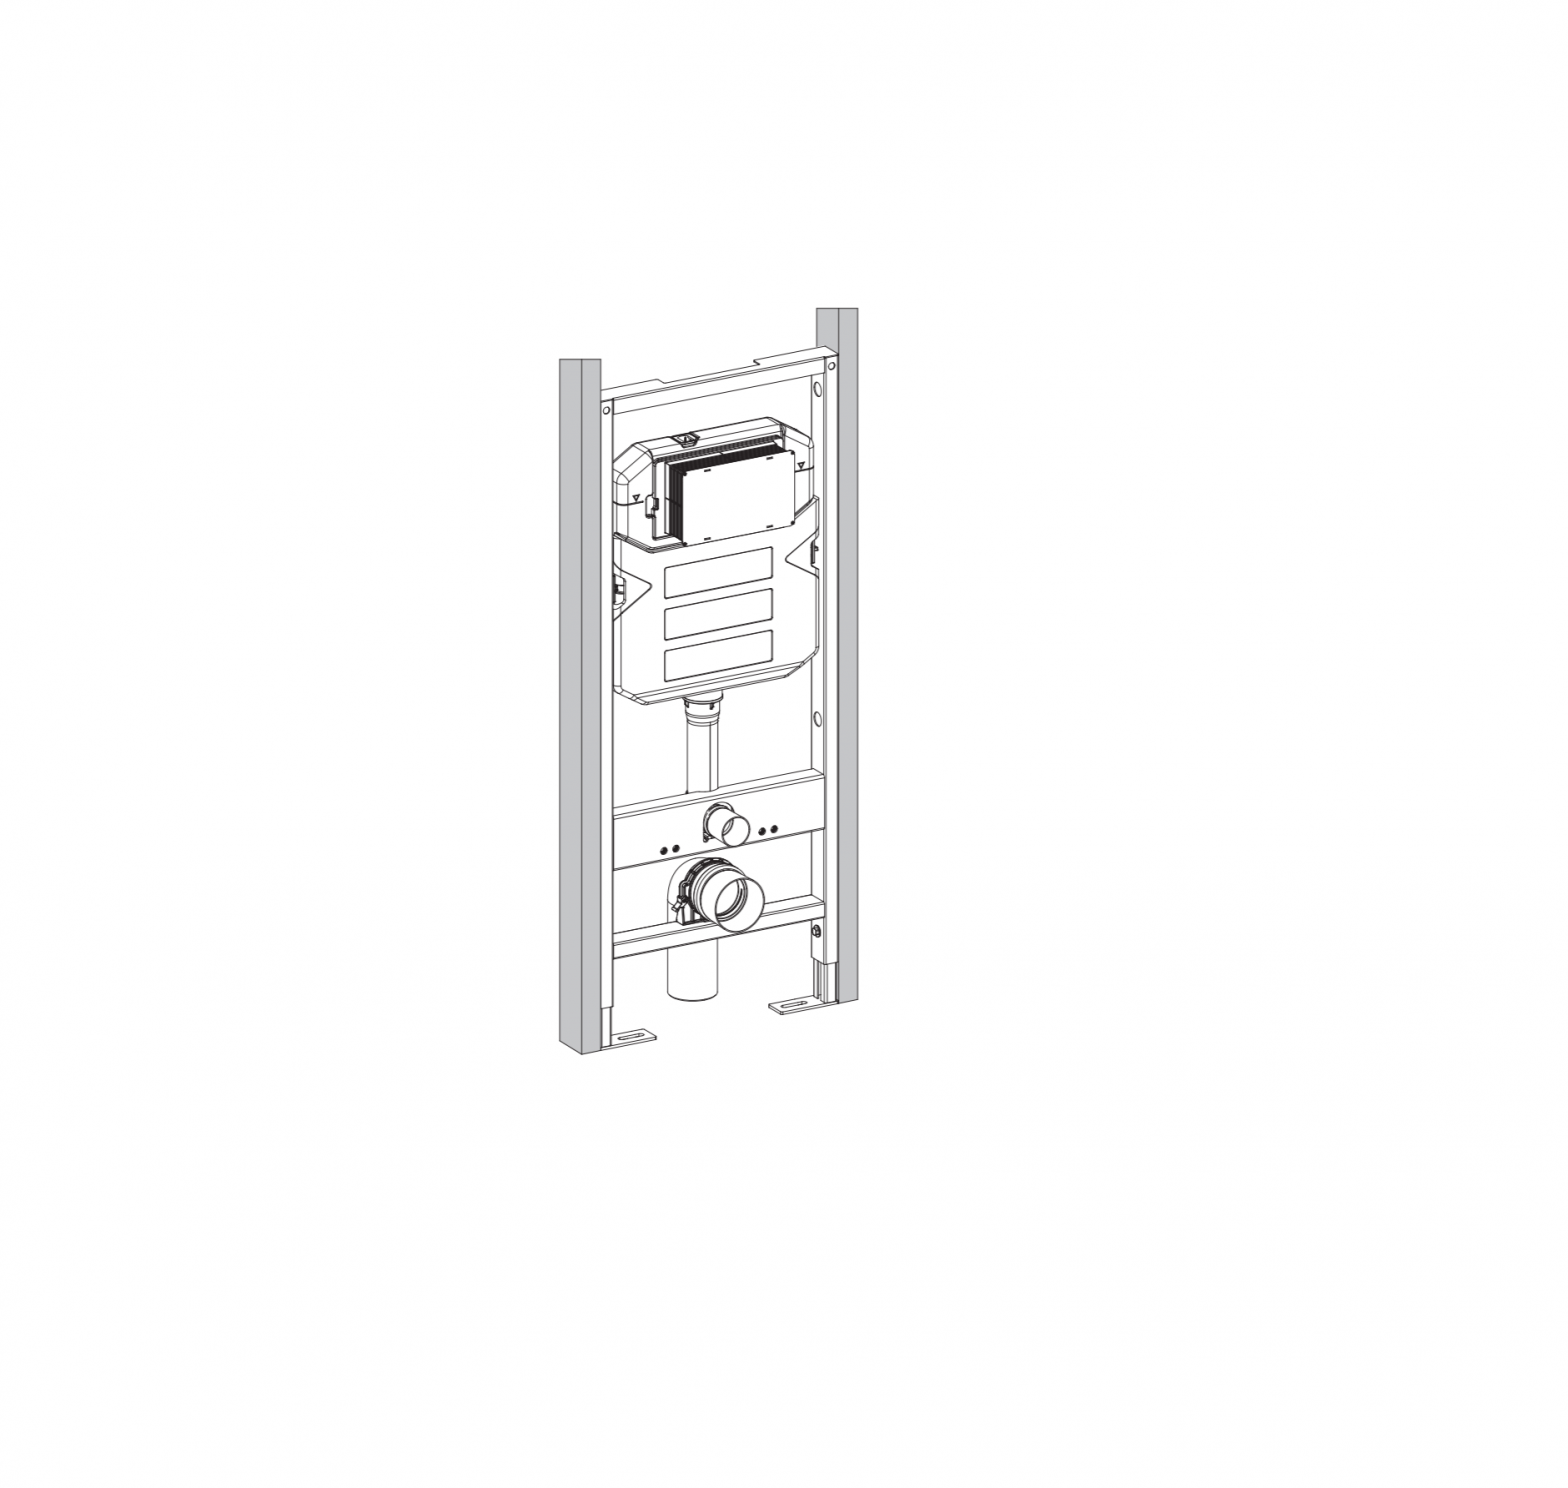 Swiss Madison SM-WC426 Wall Hung Carrier System Installation Guide